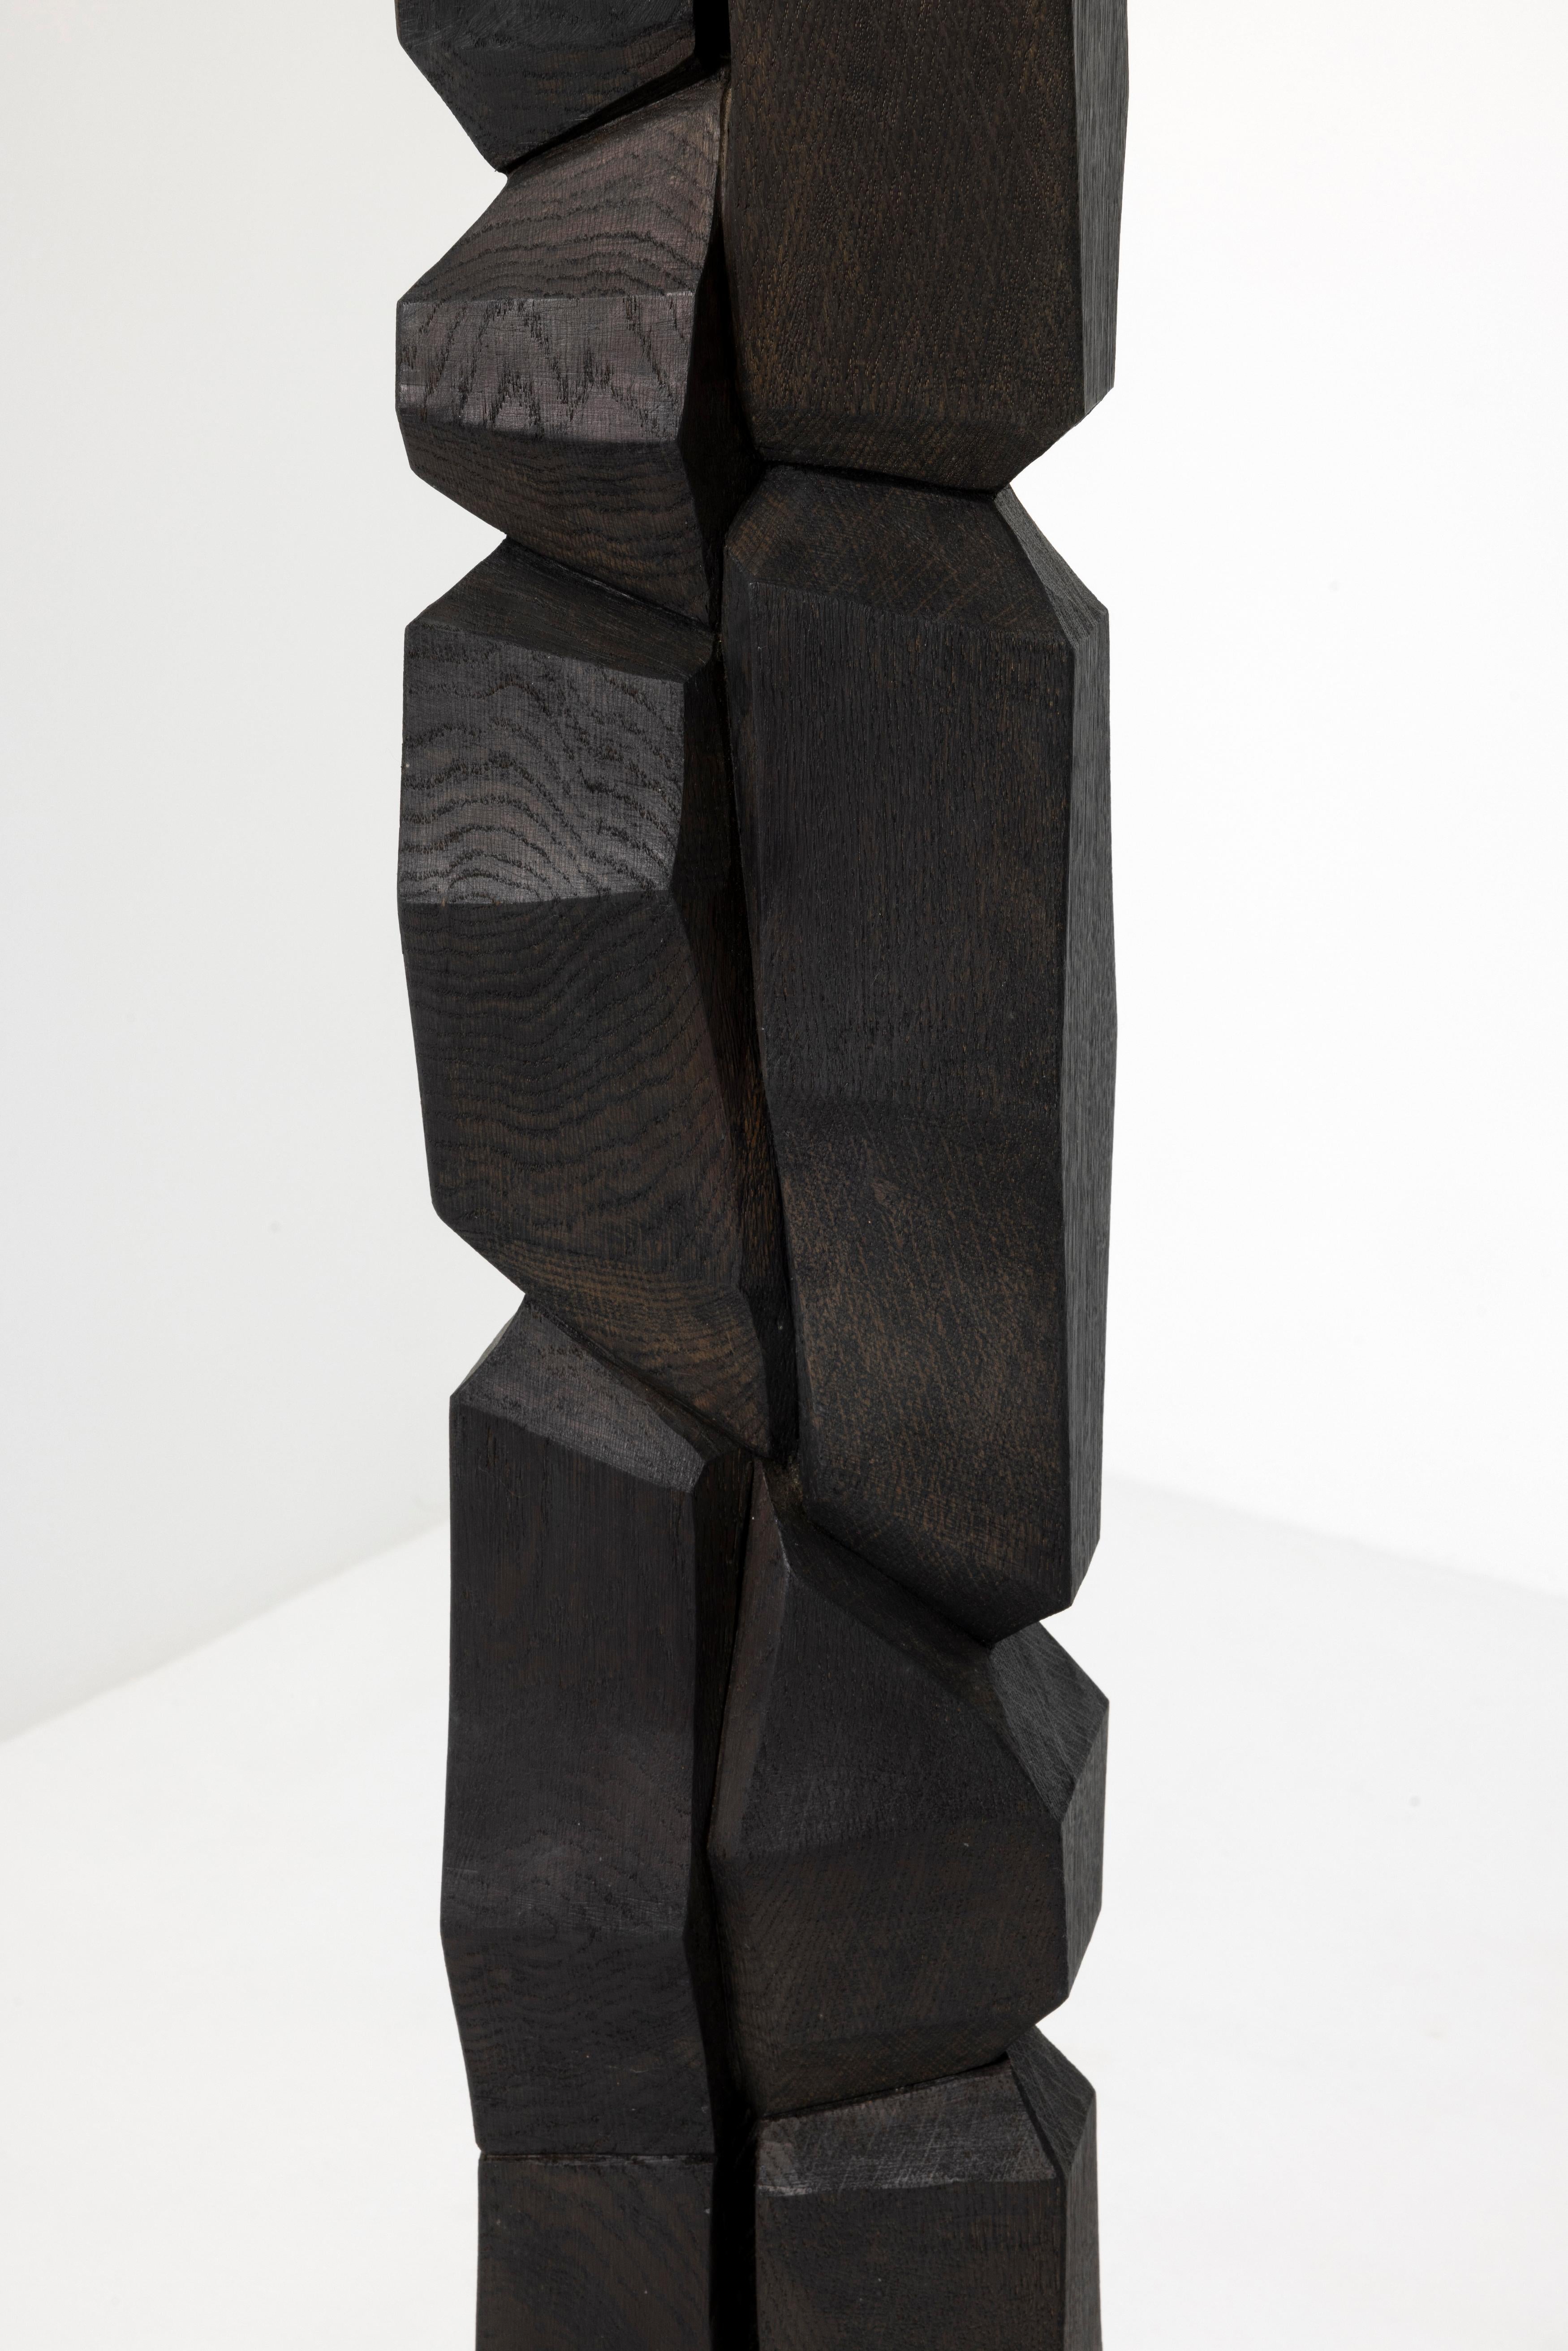 Contemporary Wooden Totem Sculpture by Bertrand Créac'h, France For Sale 5